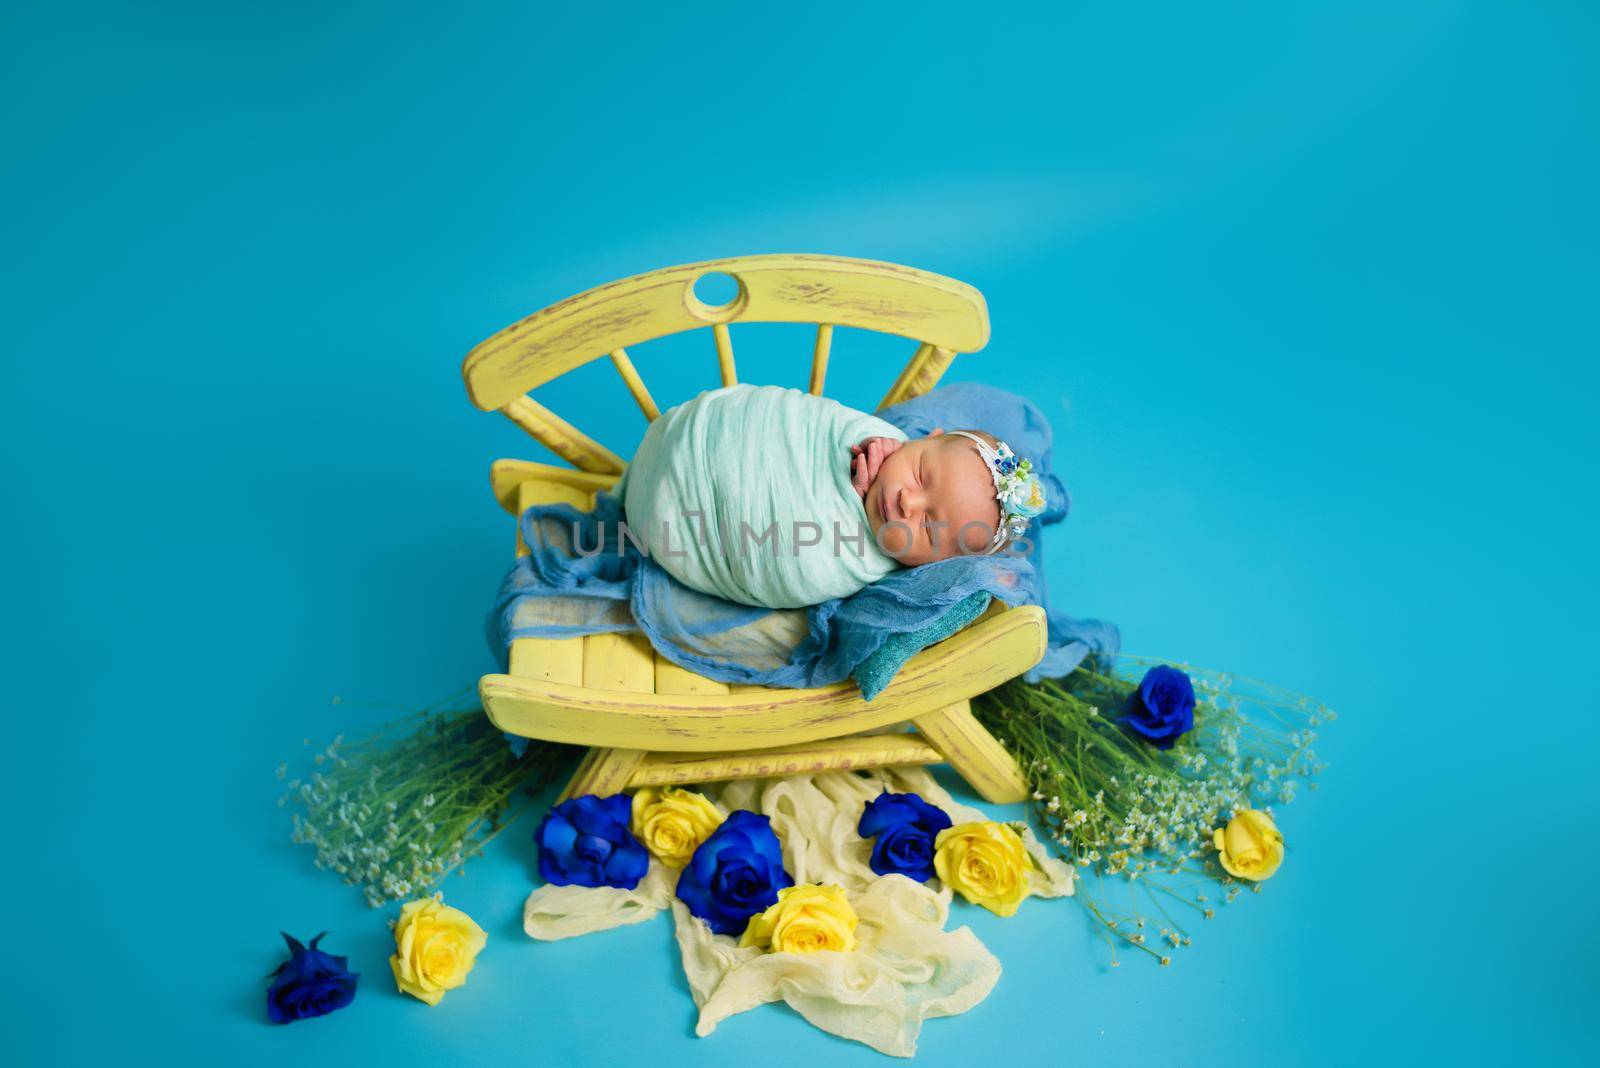 Ukrainian newborn in the studio patriotic blue yellow colors during the war in Ukraine 2022. A little baby, girl sleeps on a chair